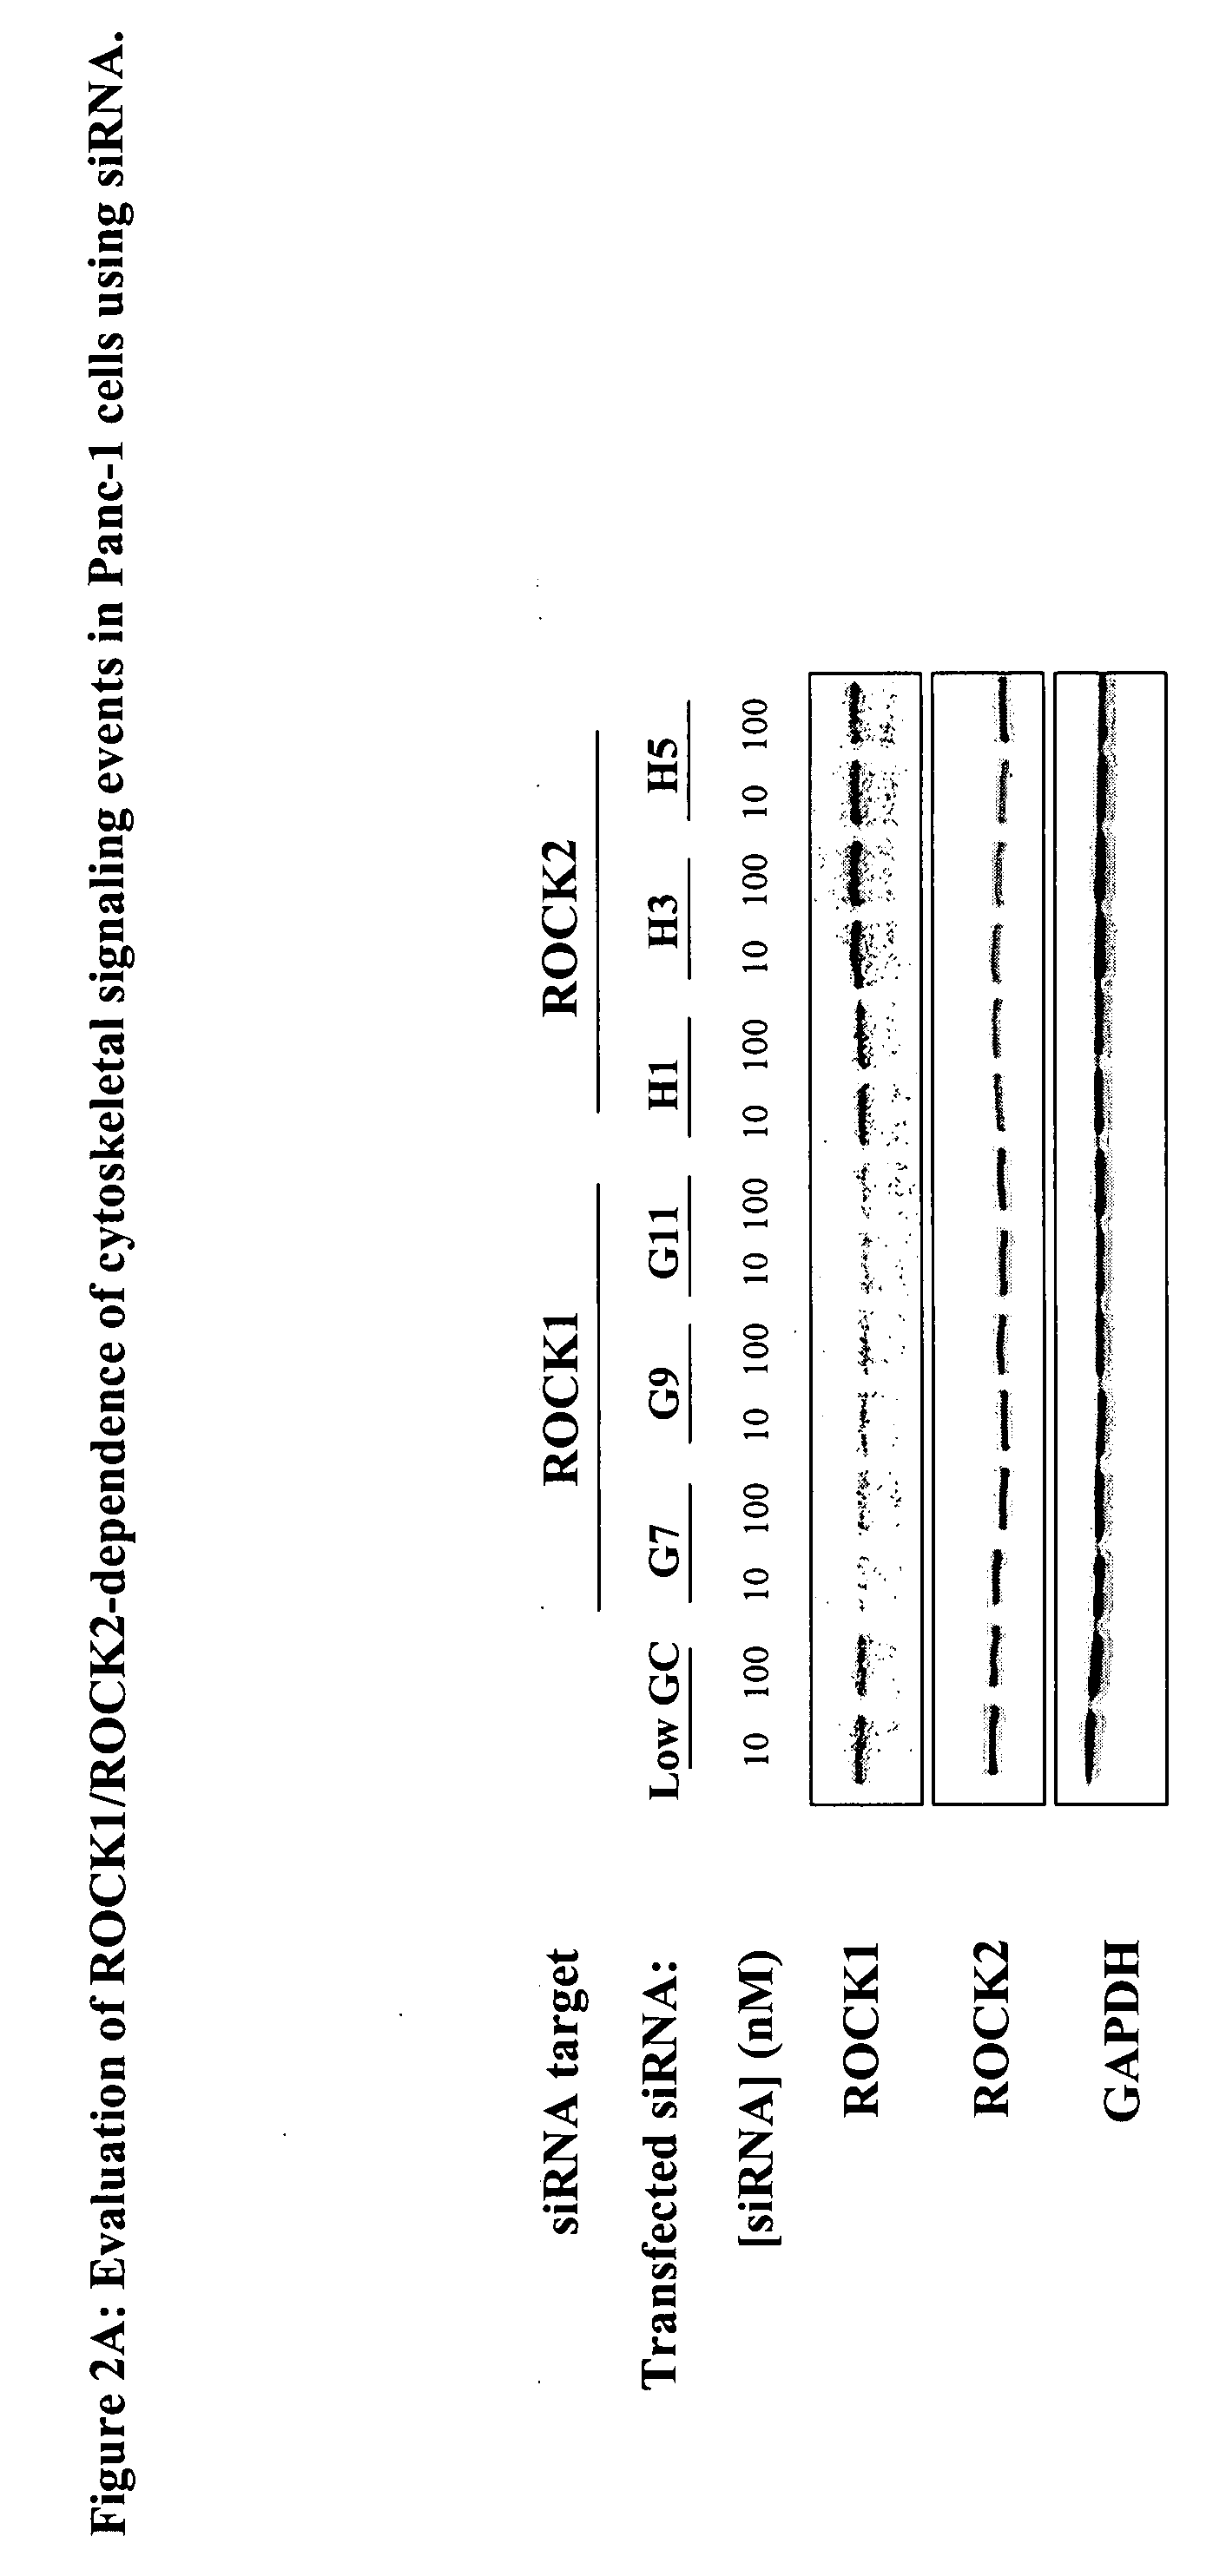 Method for the assay of rock kinase activity in cells